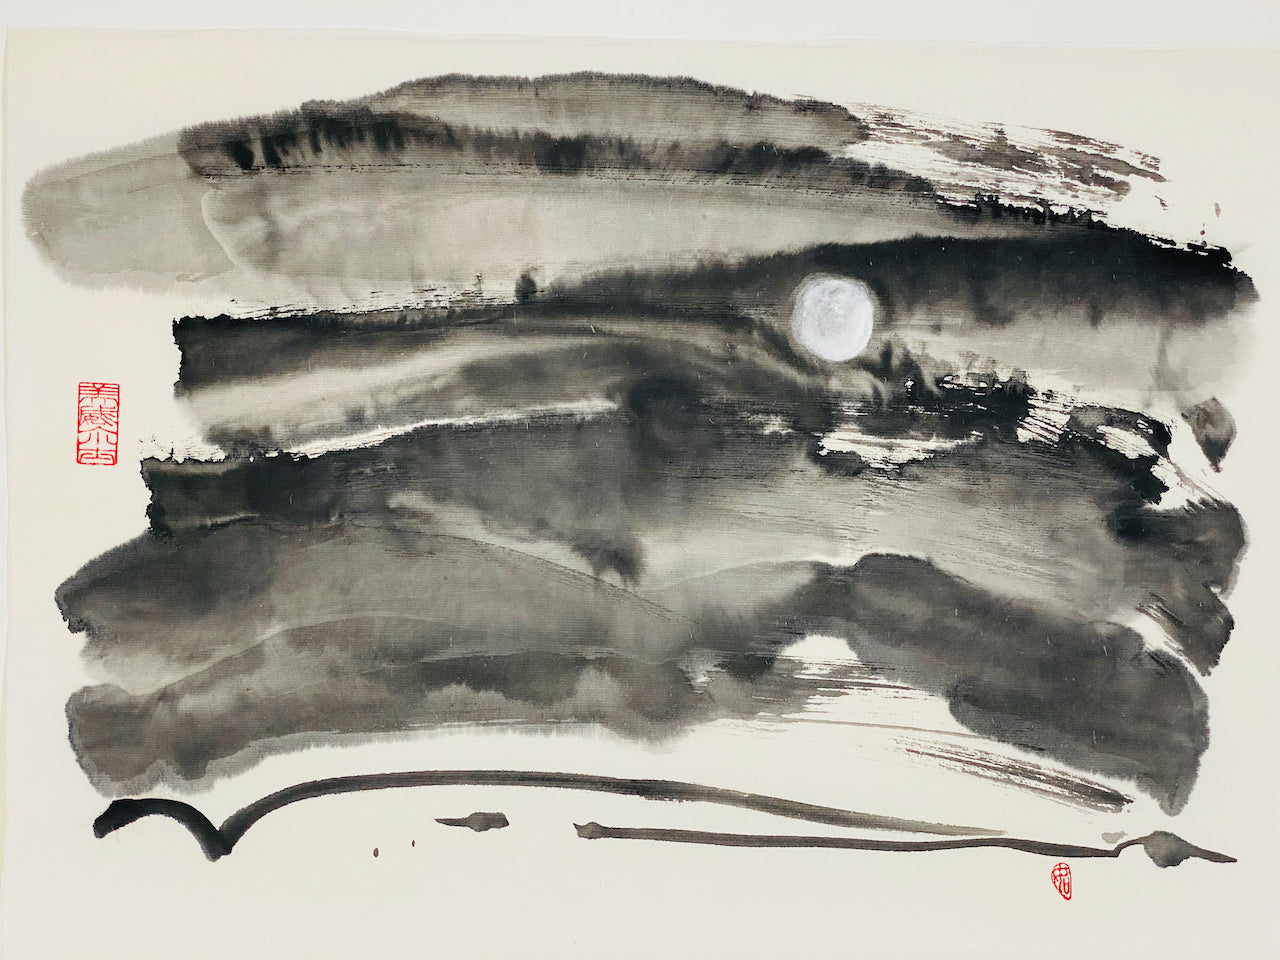 Abstract sumi e O“A Pallid Ember” by Marilyn Wells Abstract sumi e Original